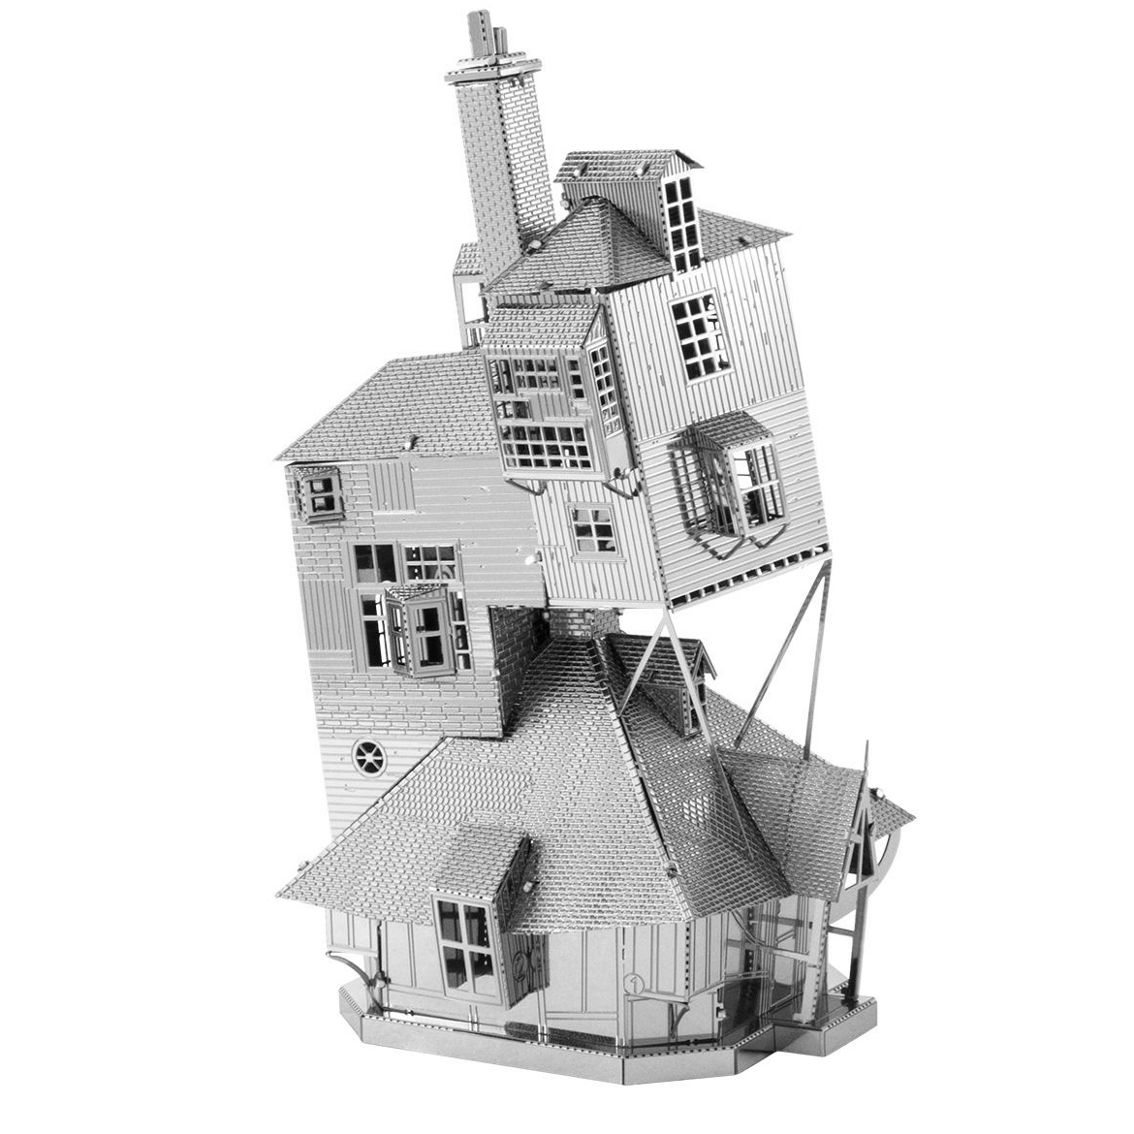 Fascinations Metal Earth 3D Model Kit - Harry Potter The Burrow Weasley Family Home - Image 2 of 5